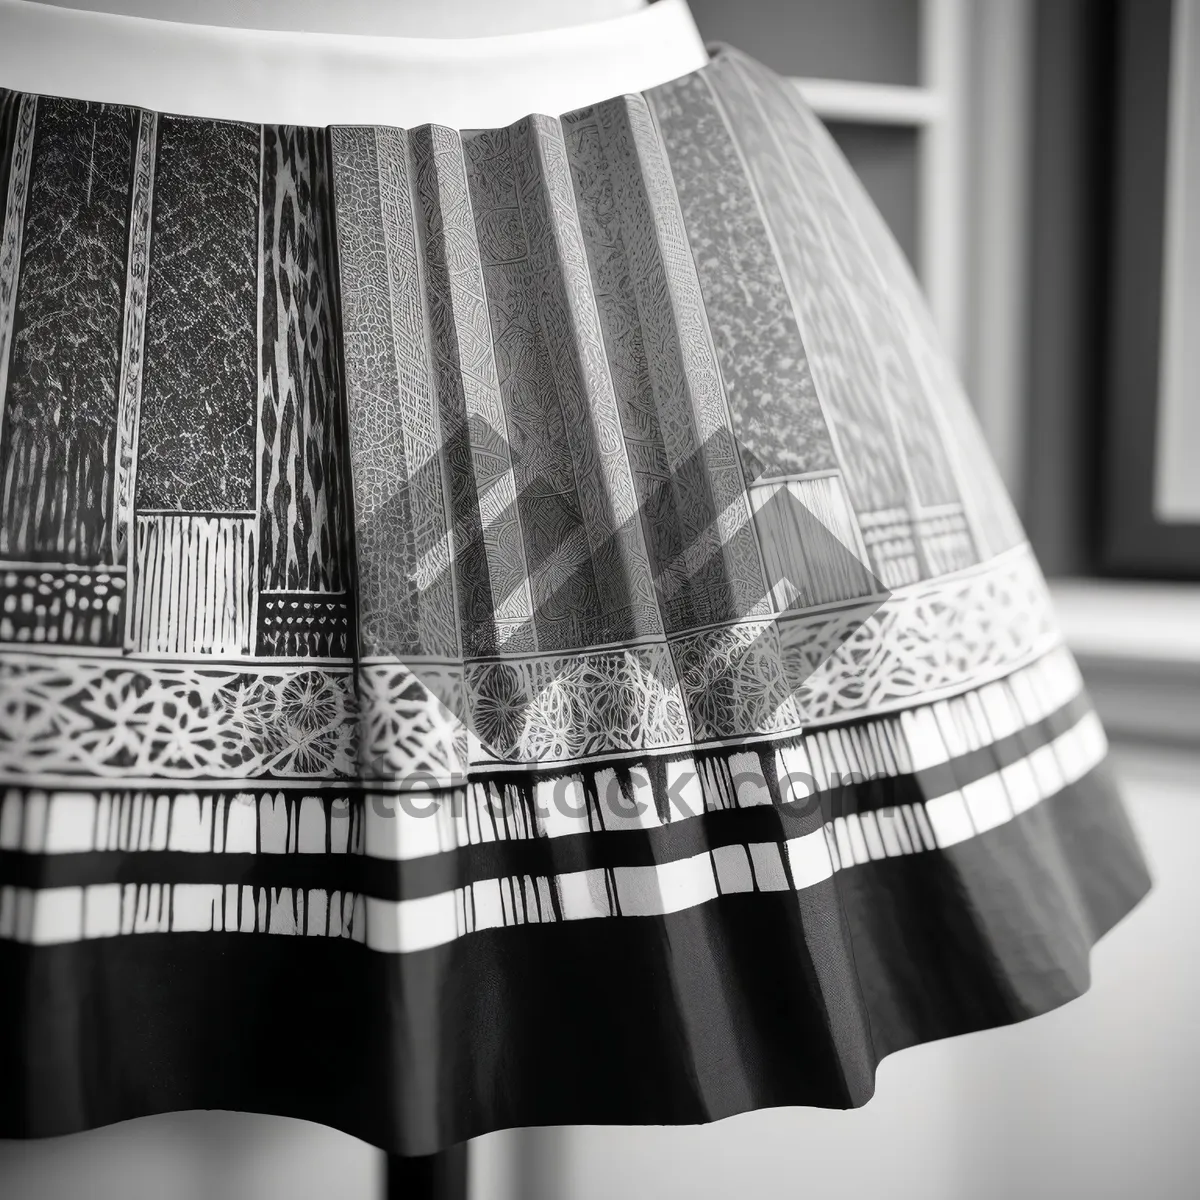 Picture of Stylish Miniskirt Fashion Lampshade Covering